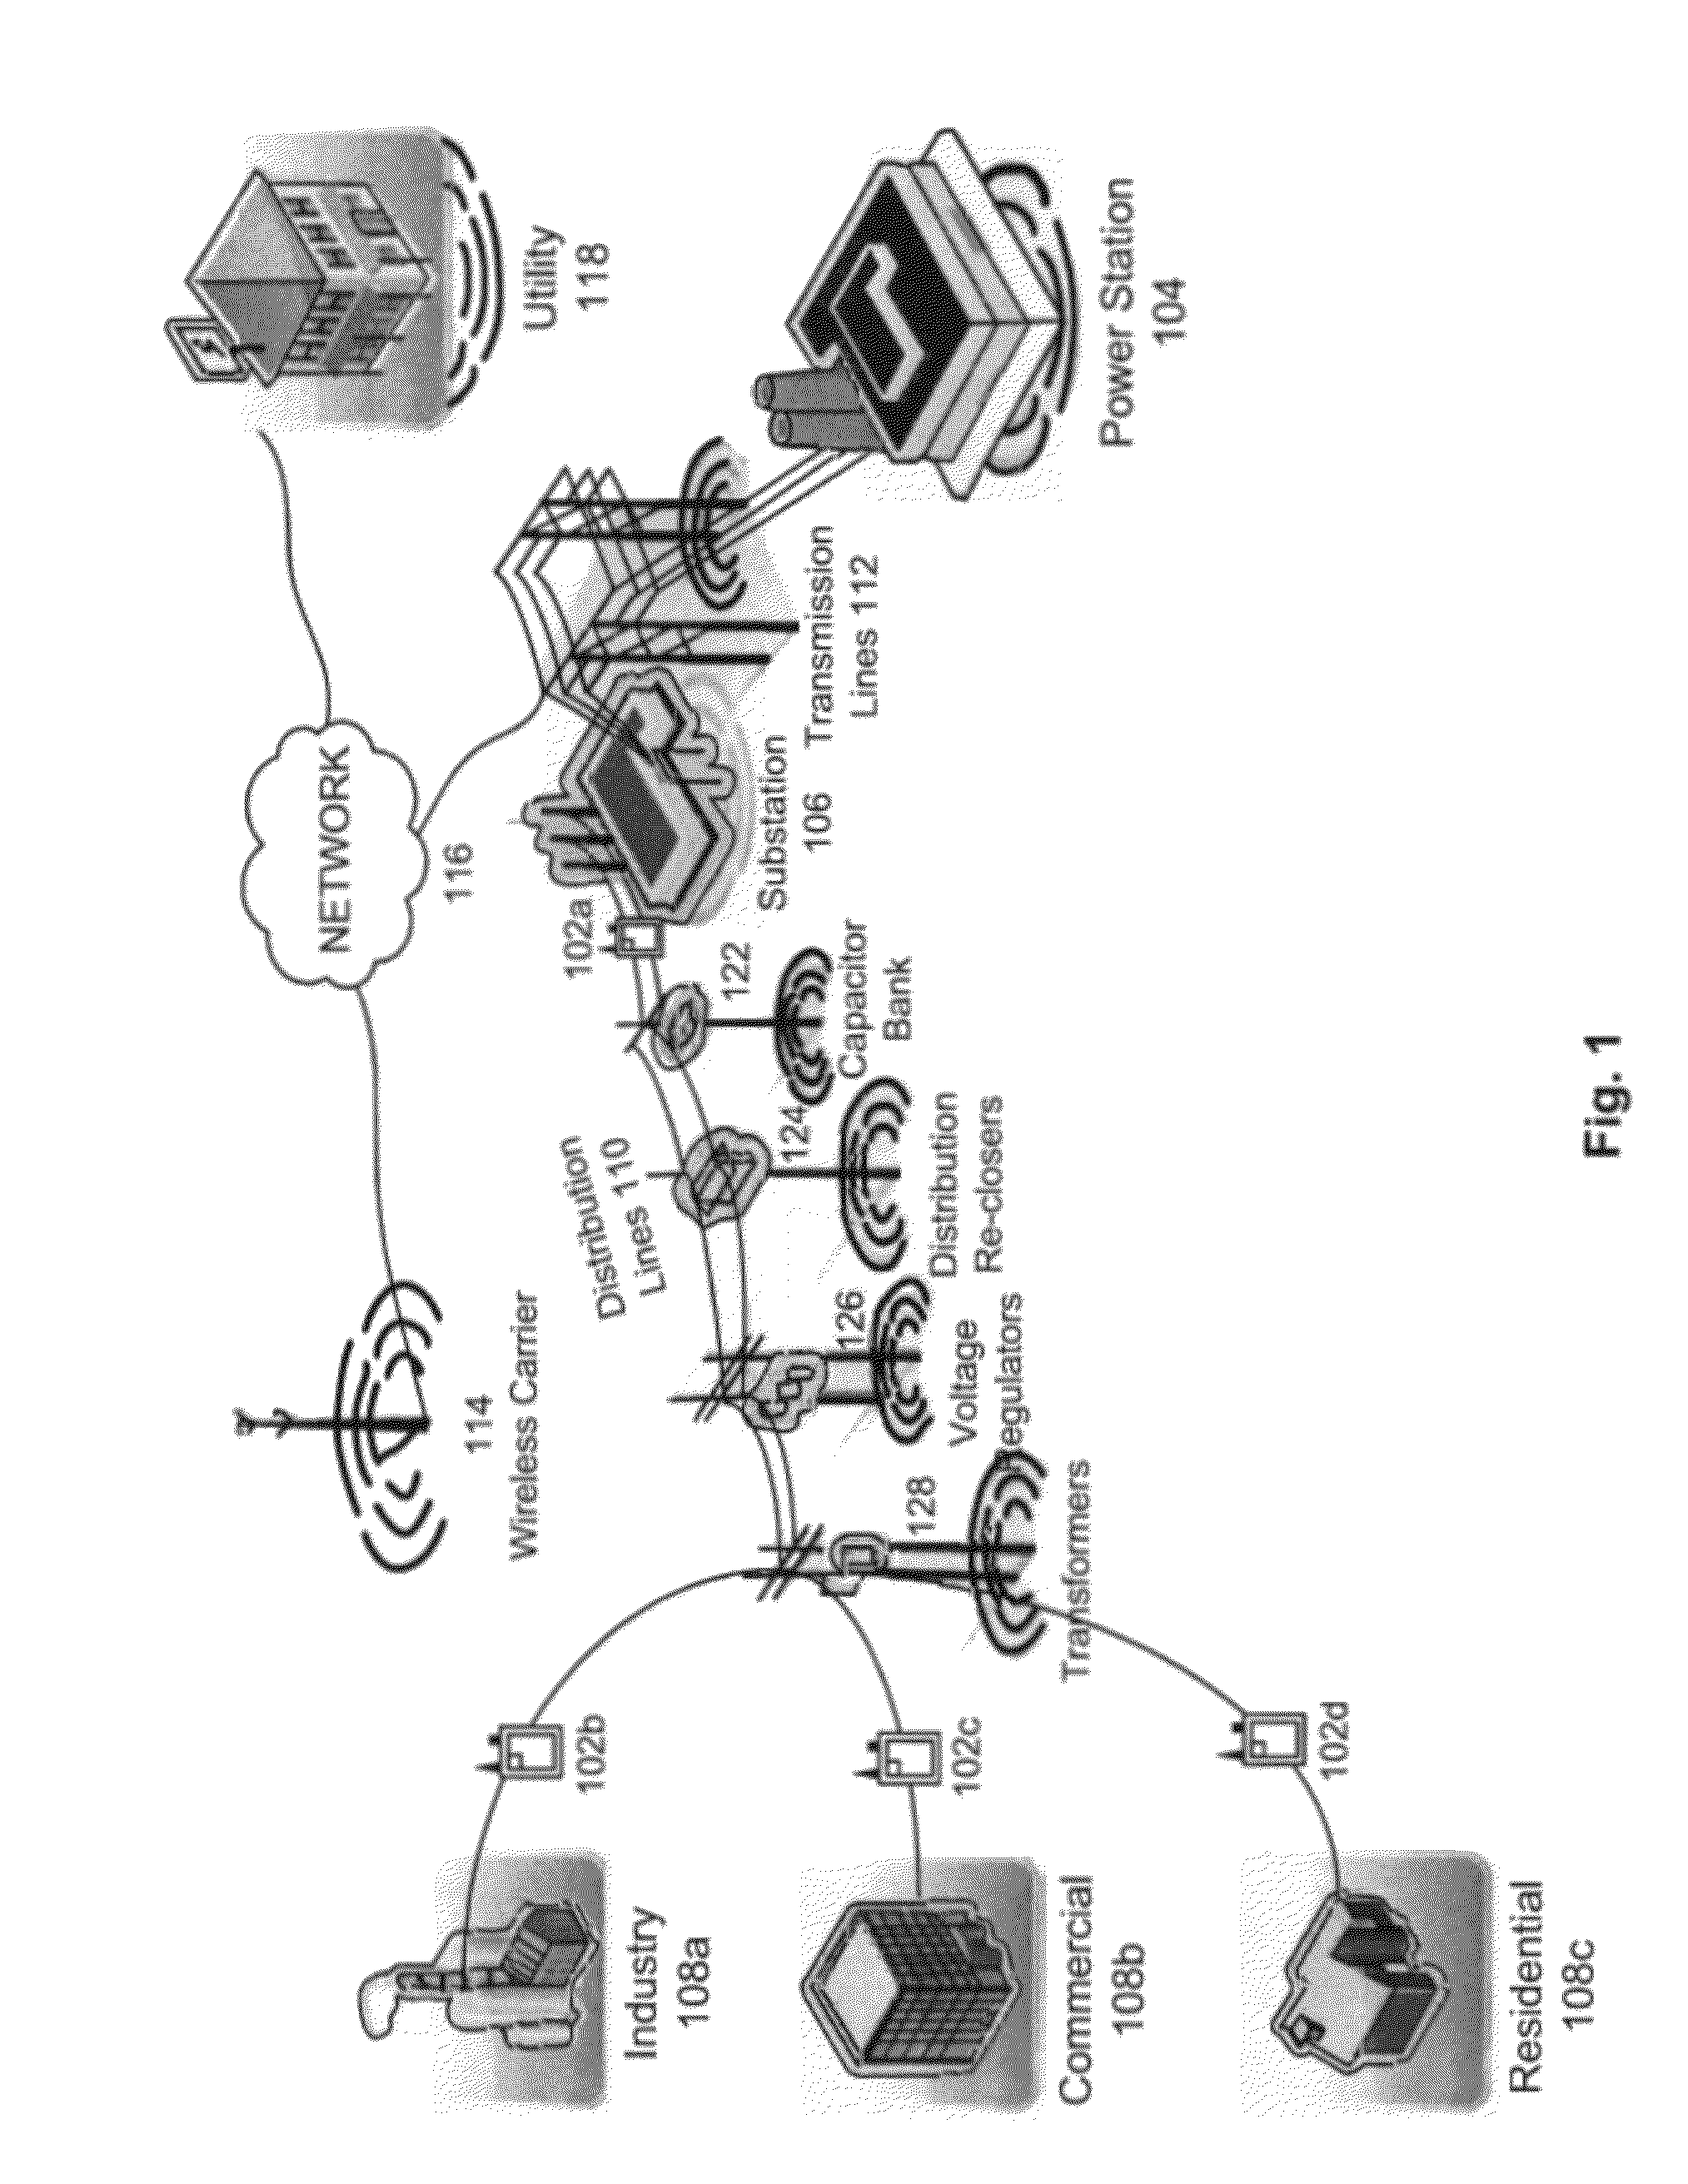 Interface bus for utility-grade network communication devices